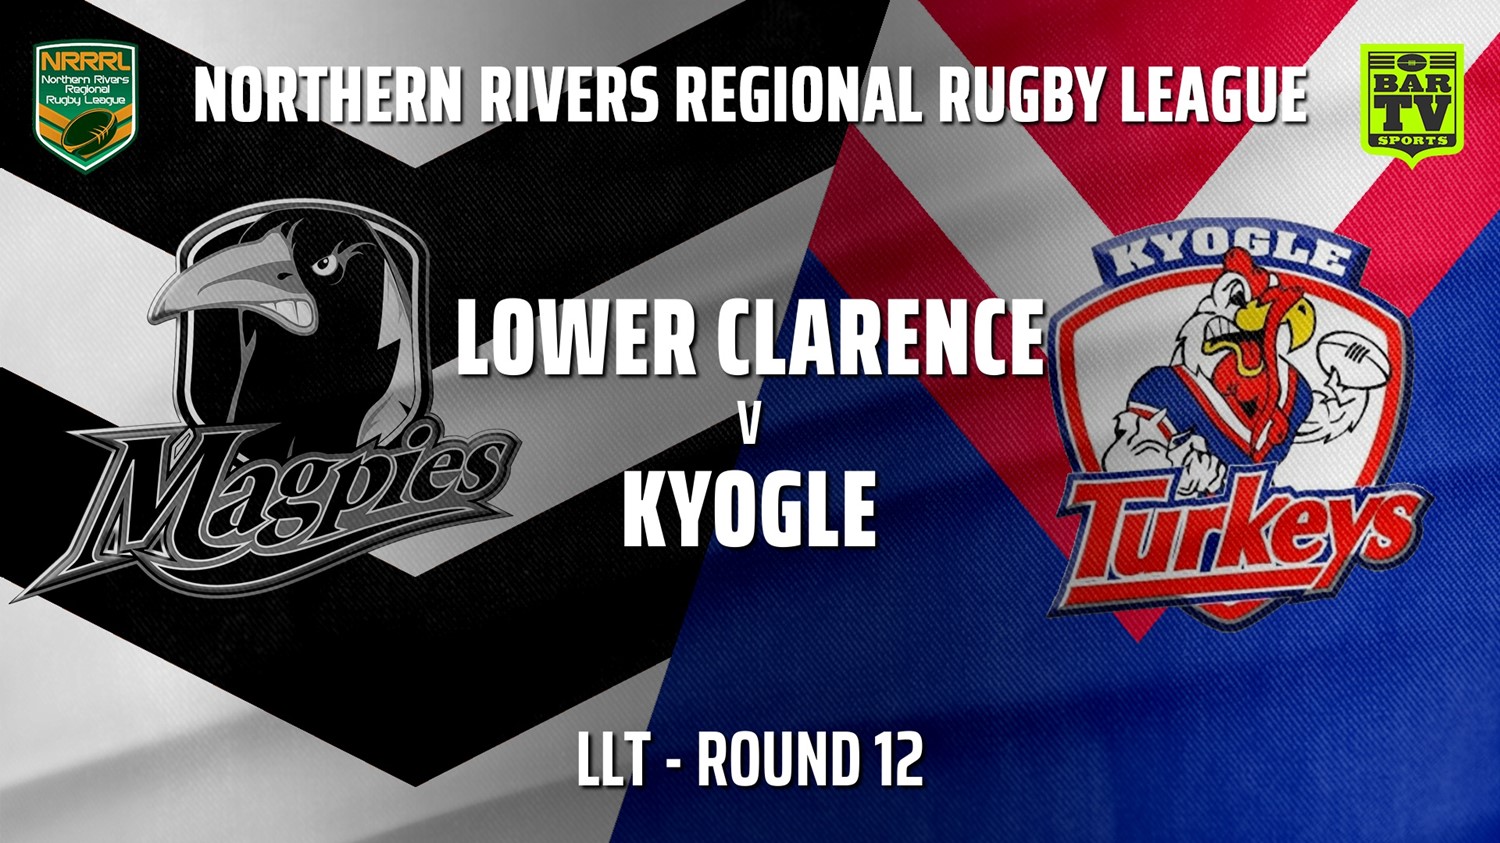 210725-Northern Rivers Round 12 - LLT - Lower Clarence Magpies v Kyogle Turkeys Slate Image